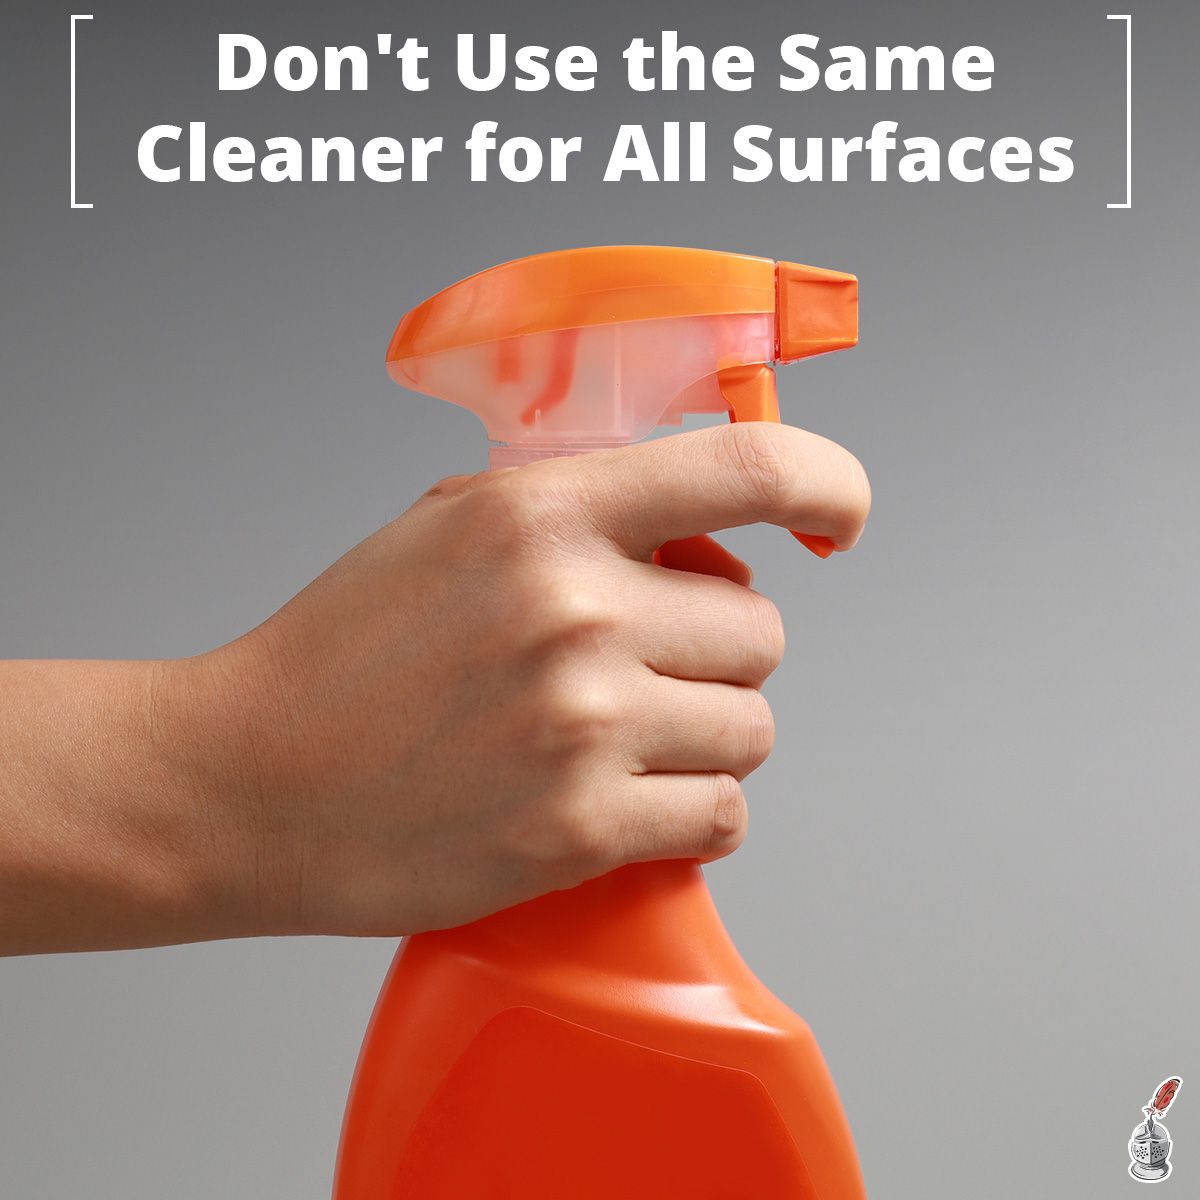 Don't Use the Same Cleaner for All Surfaces